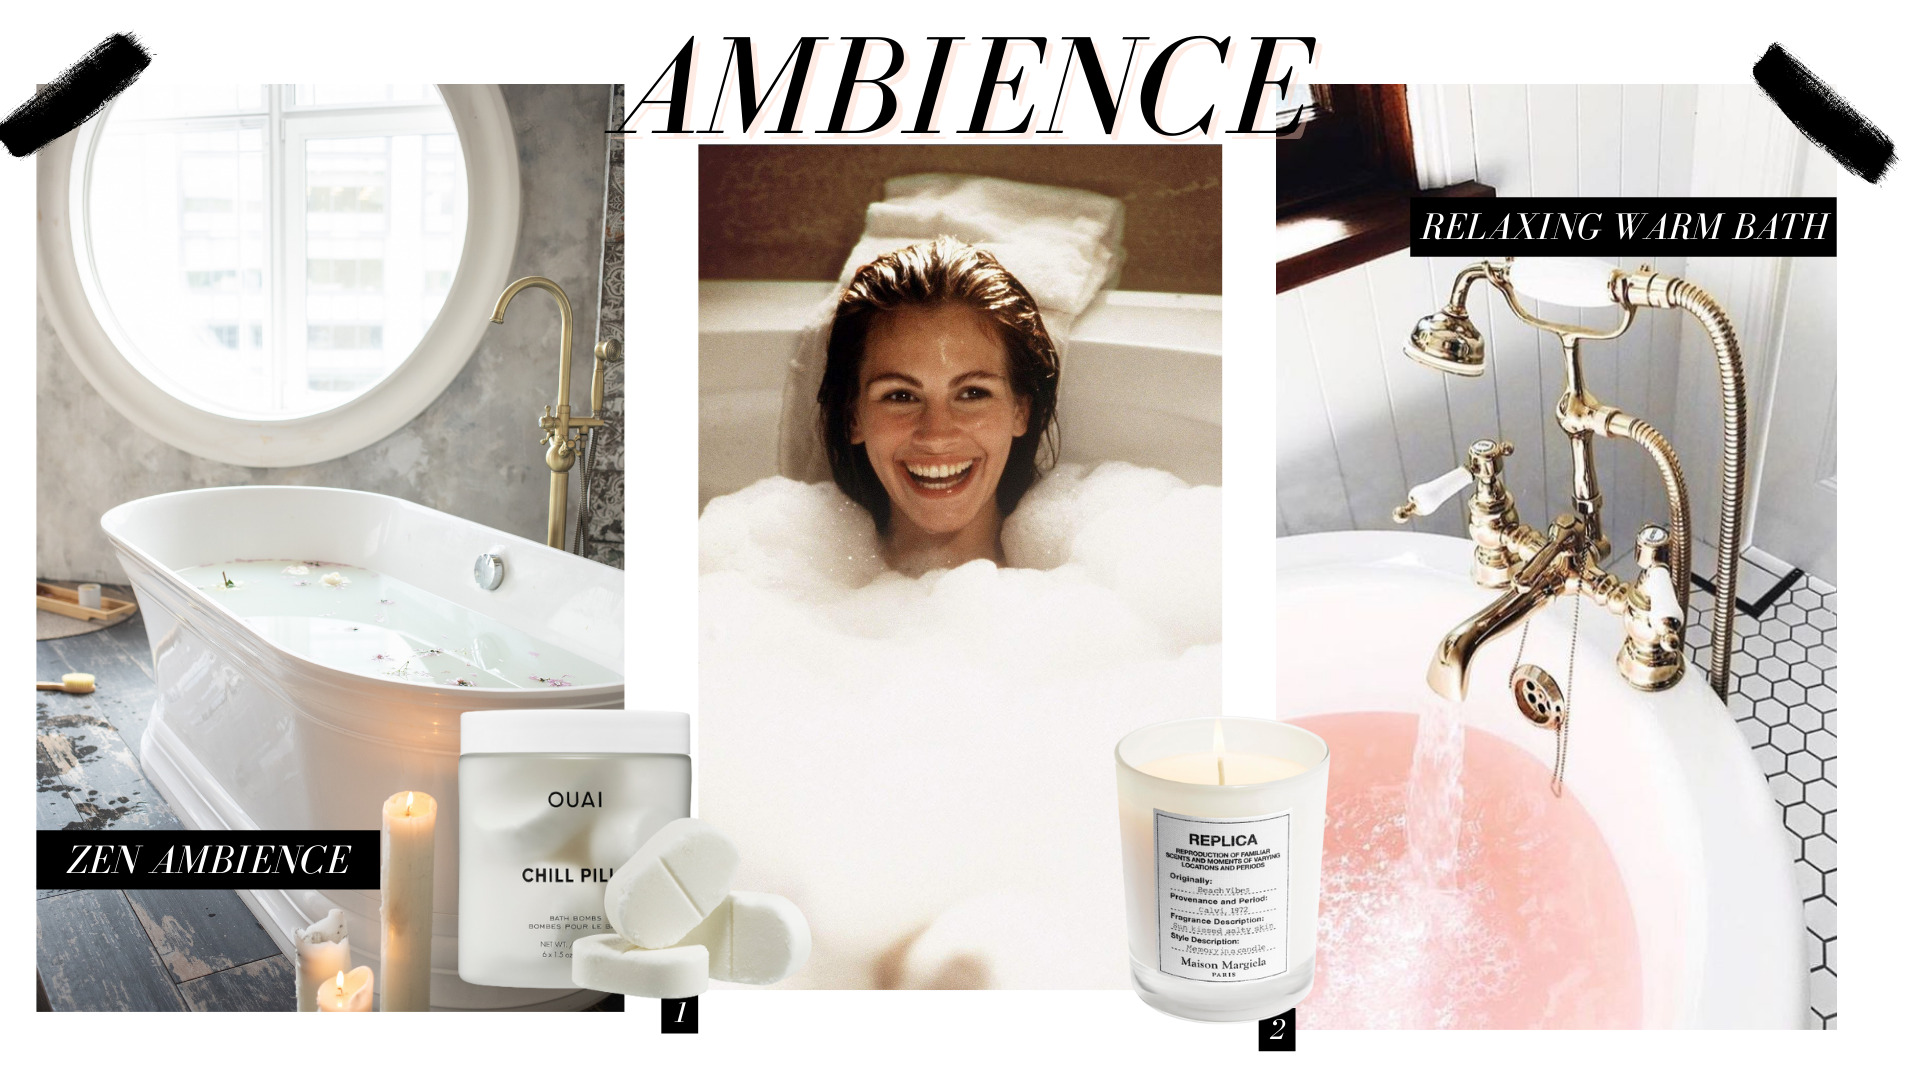 Having a wellness routine has never been as important as it is today. Sometimes it might seem unobtainable to have a spa day- however, we found a solution! Here you will find how to create an at-home spa for a relaxing and luxurious experience.